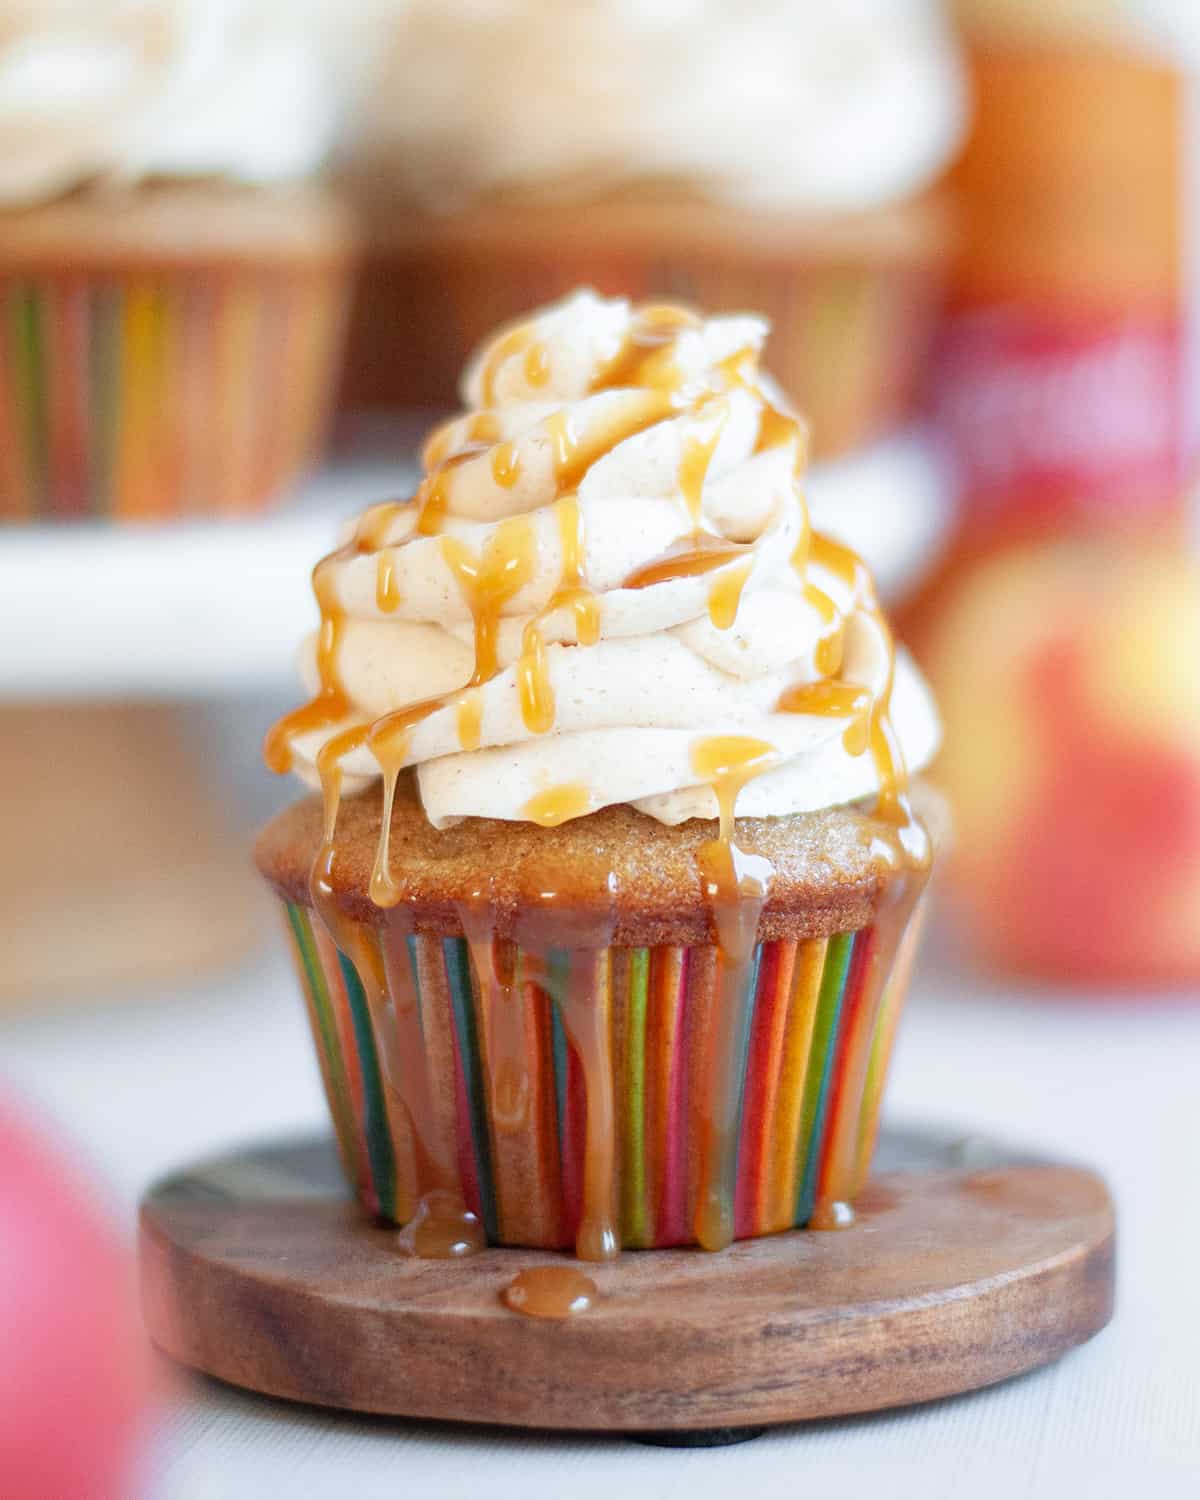 Apple cupcake with caramel sauce dripping over top whipped topping.